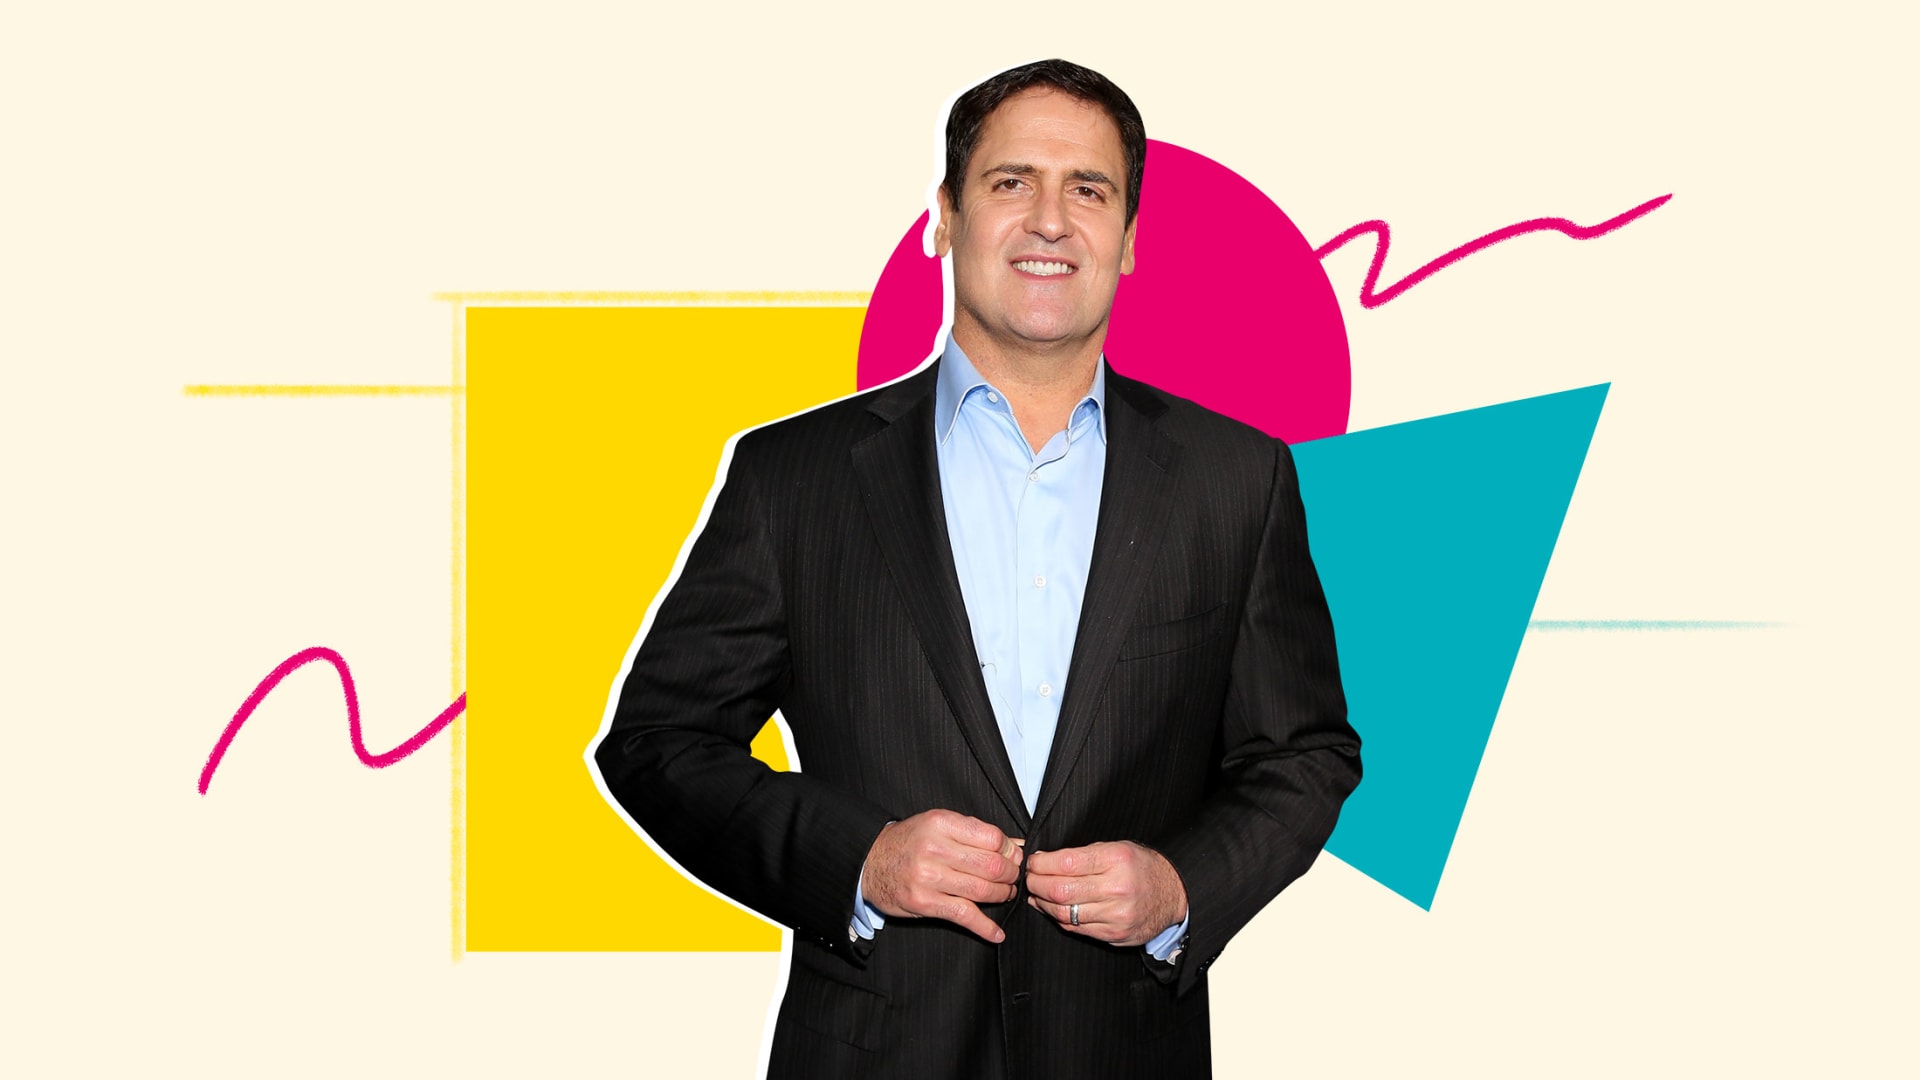 Mark Cuban's Case for Diversity in Business: 'I Like to Invest Where People Aren't Looking'